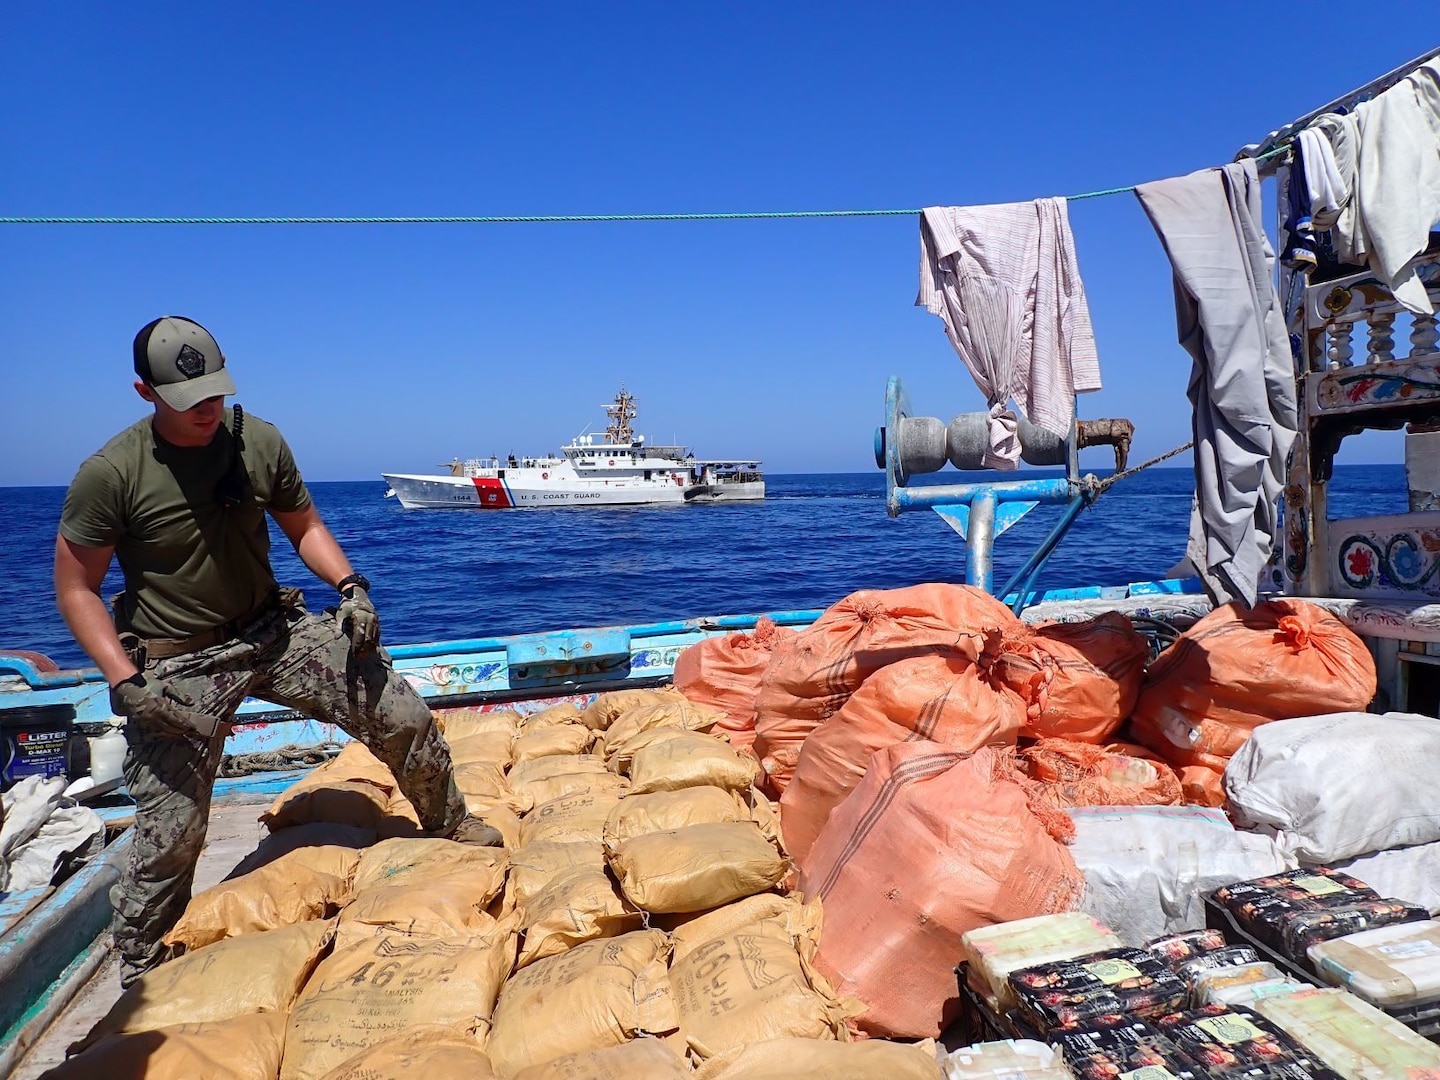 221010-G-NO146-1002 GULF OF OMAN (Oct. 10, 2022) Personnel from U.S. Coast Guard fast response cutter USCGC Glen Harris (WPC 1144) inventory illicit drugs seized from a fishing vessel in international waters in the Gulf of Oman, Oct. 10.